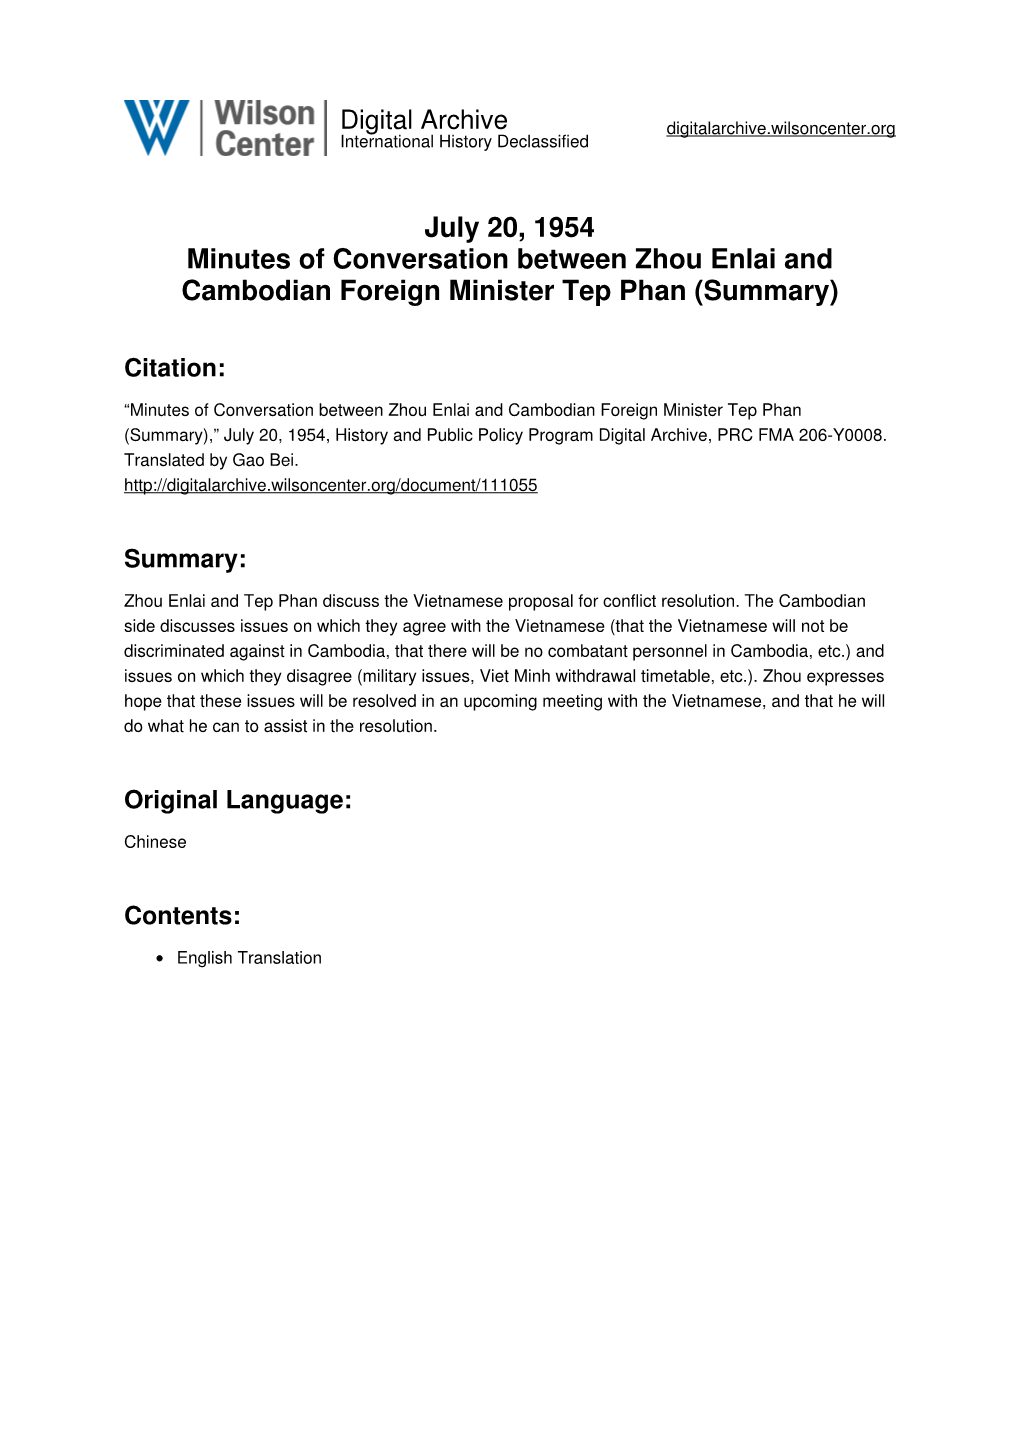 July 20, 1954 Minutes of Conversation Between Zhou Enlai and Cambodian Foreign Minister Tep Phan (Summary)